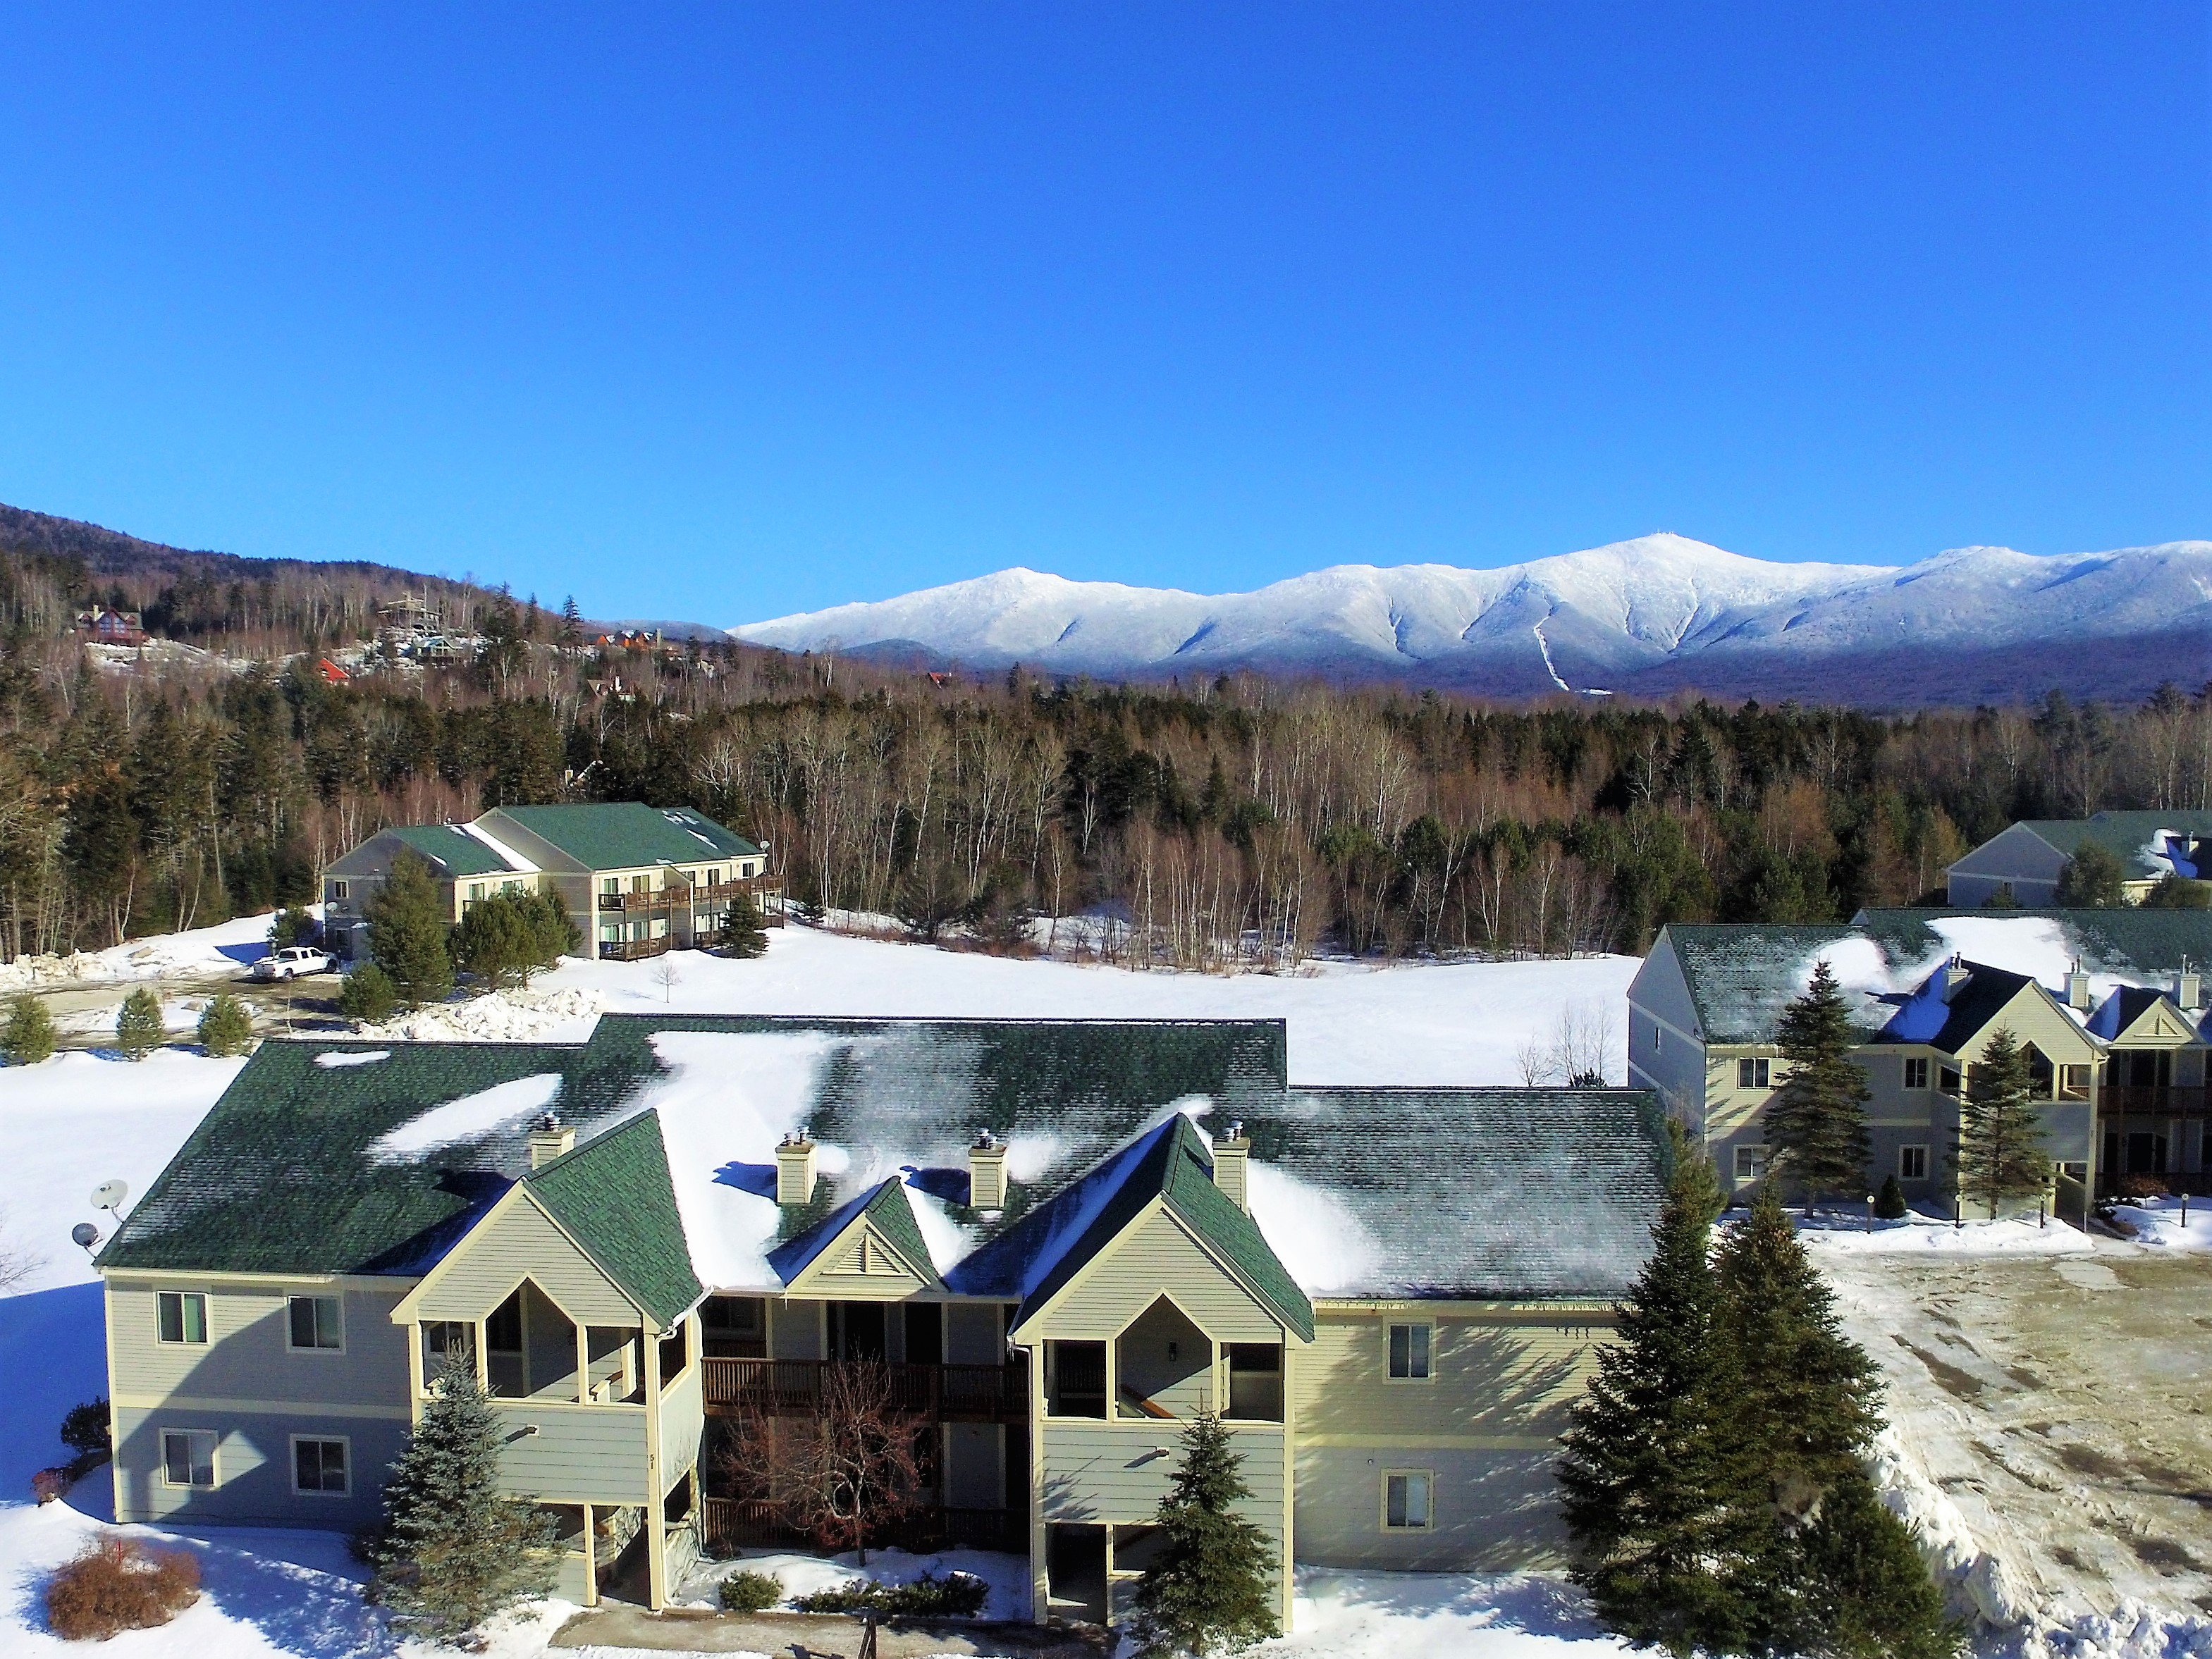 Property Image 1 - S3 AWESOME VIEW OF MOUNT WASHINGTON! Family getaway in Bretton Woods